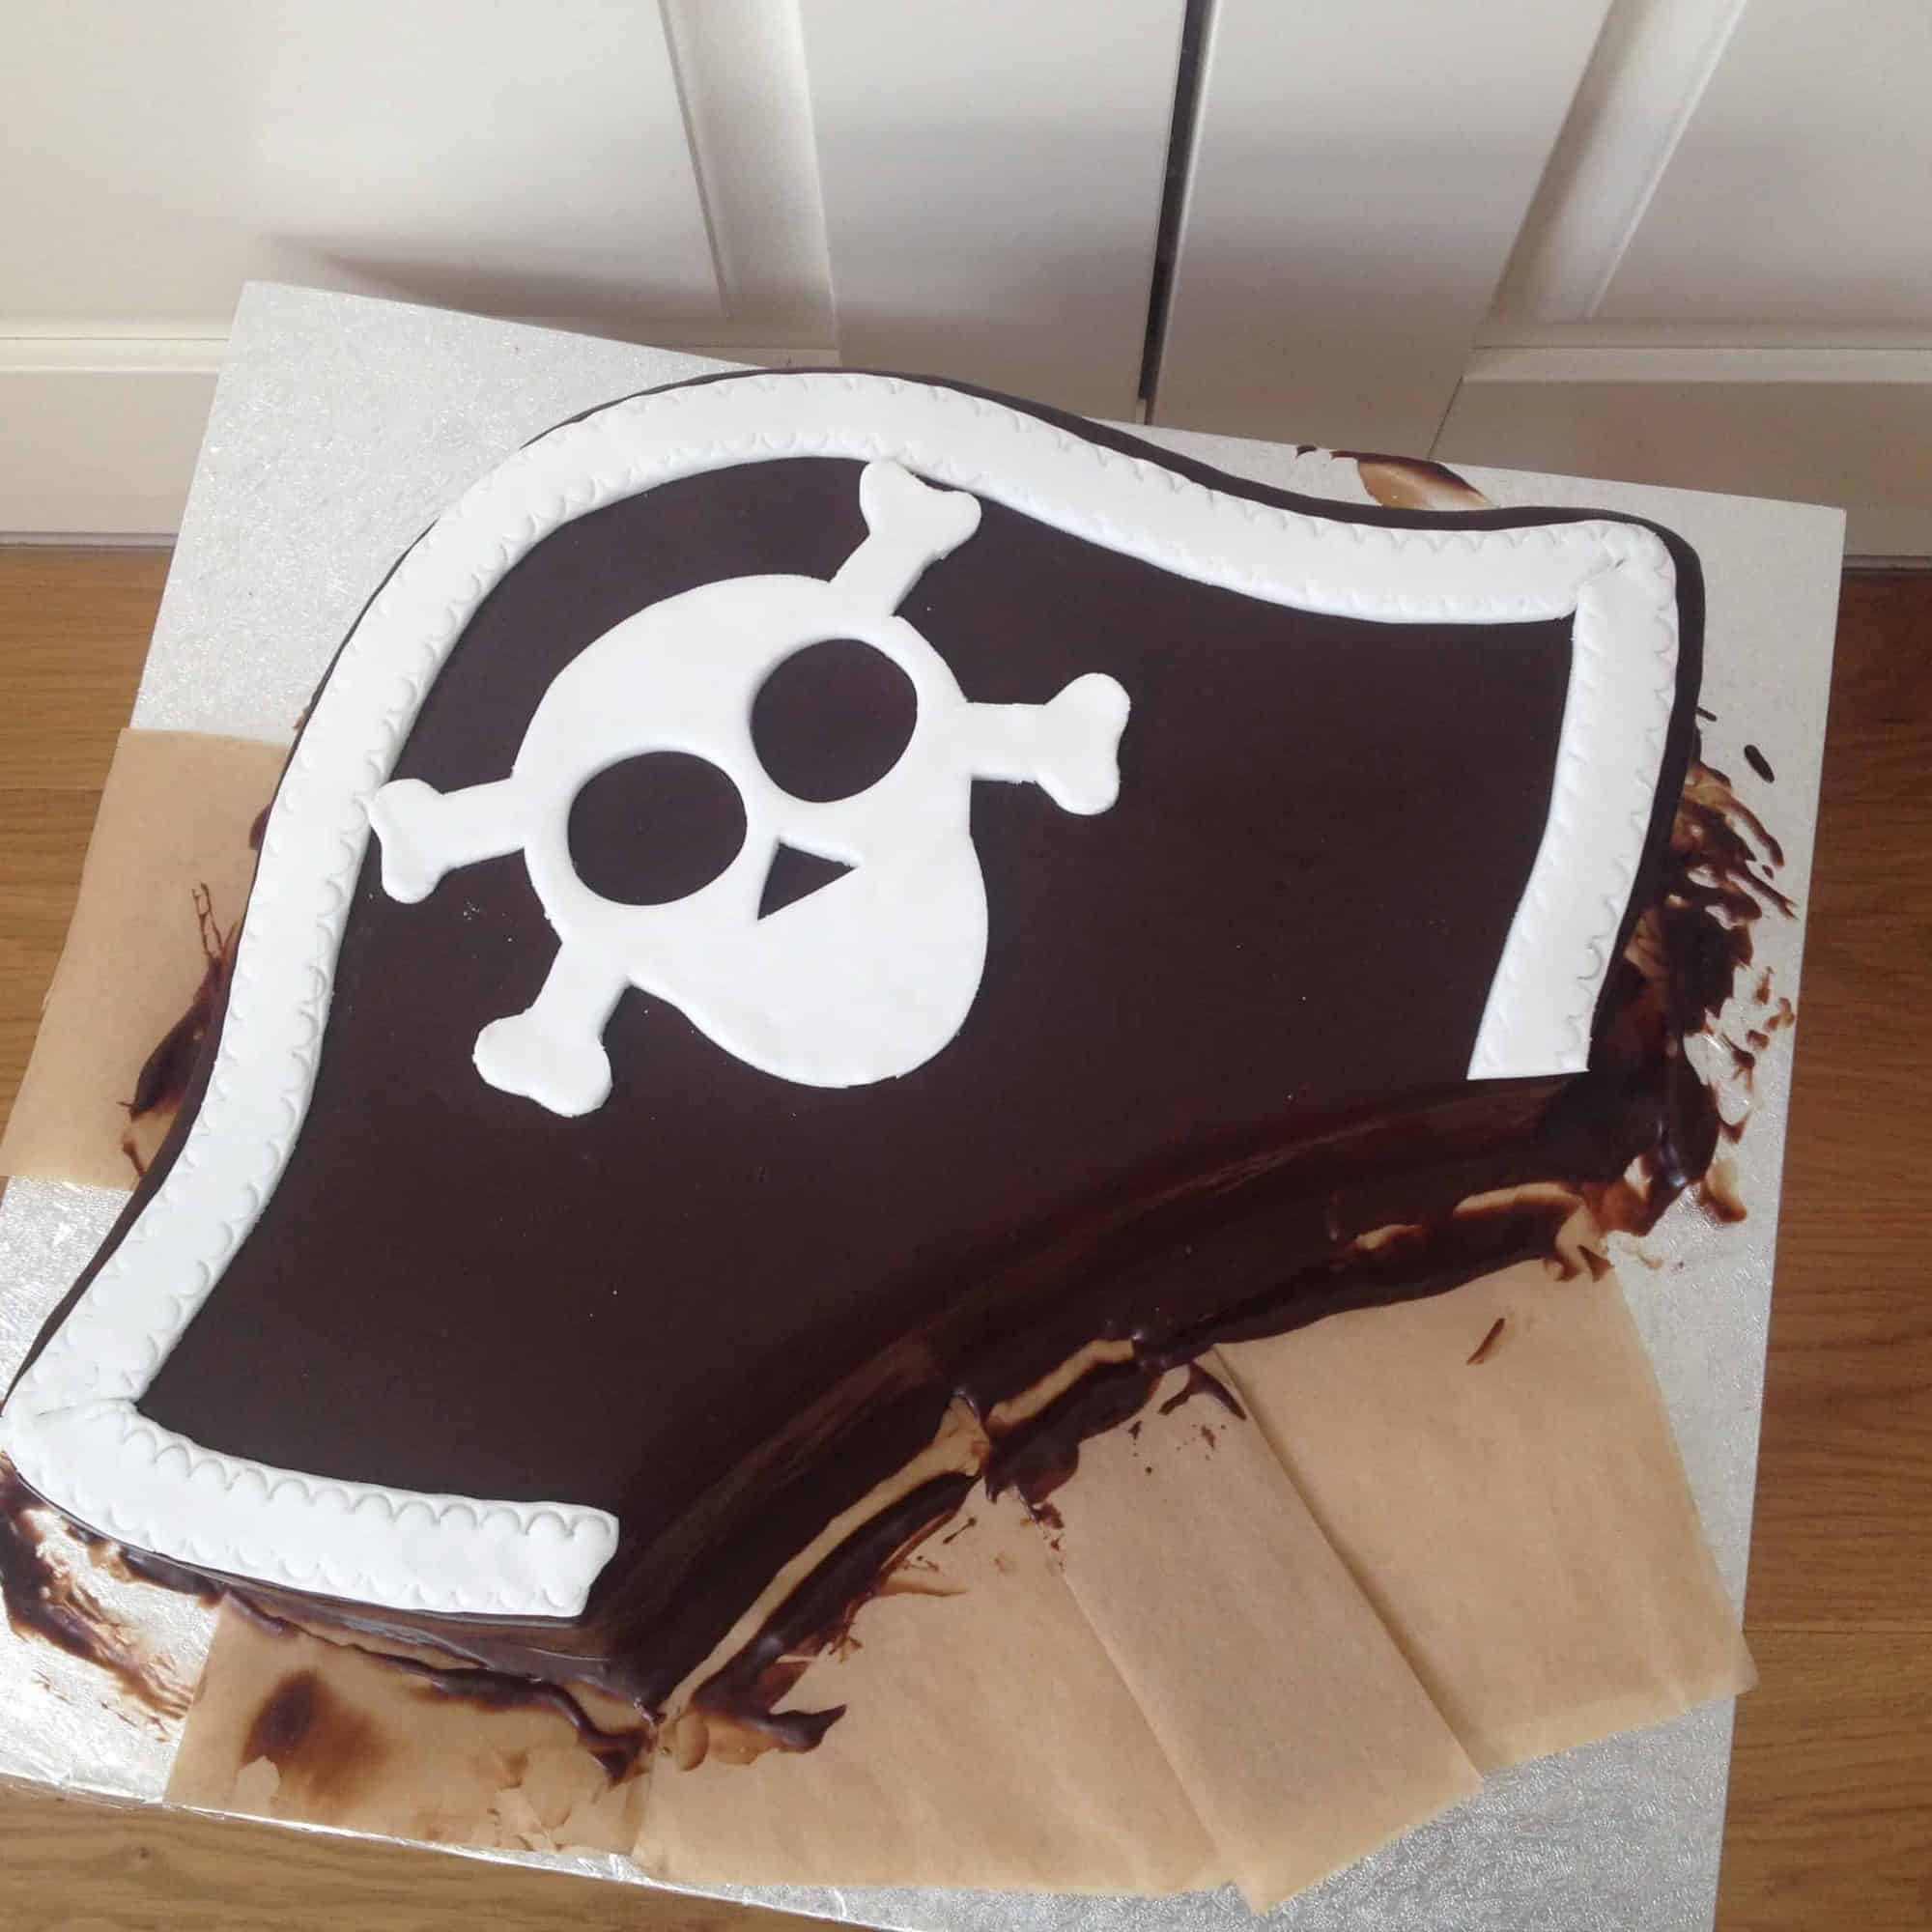 How to make a pirate hat cake